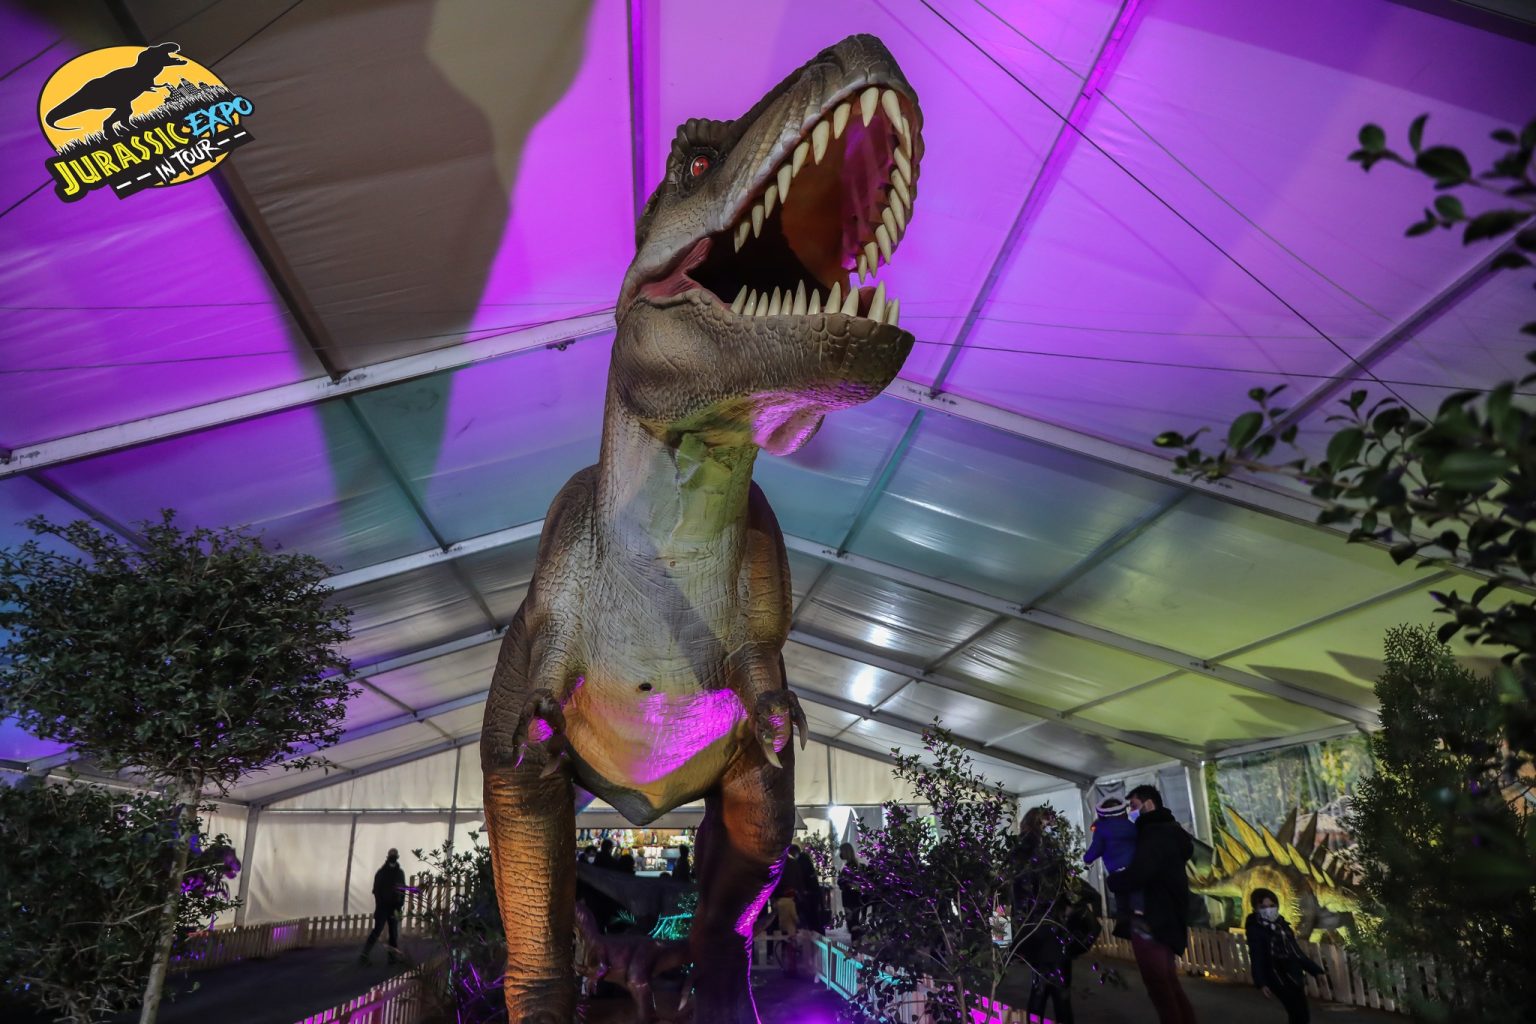 jurassic expo in tour